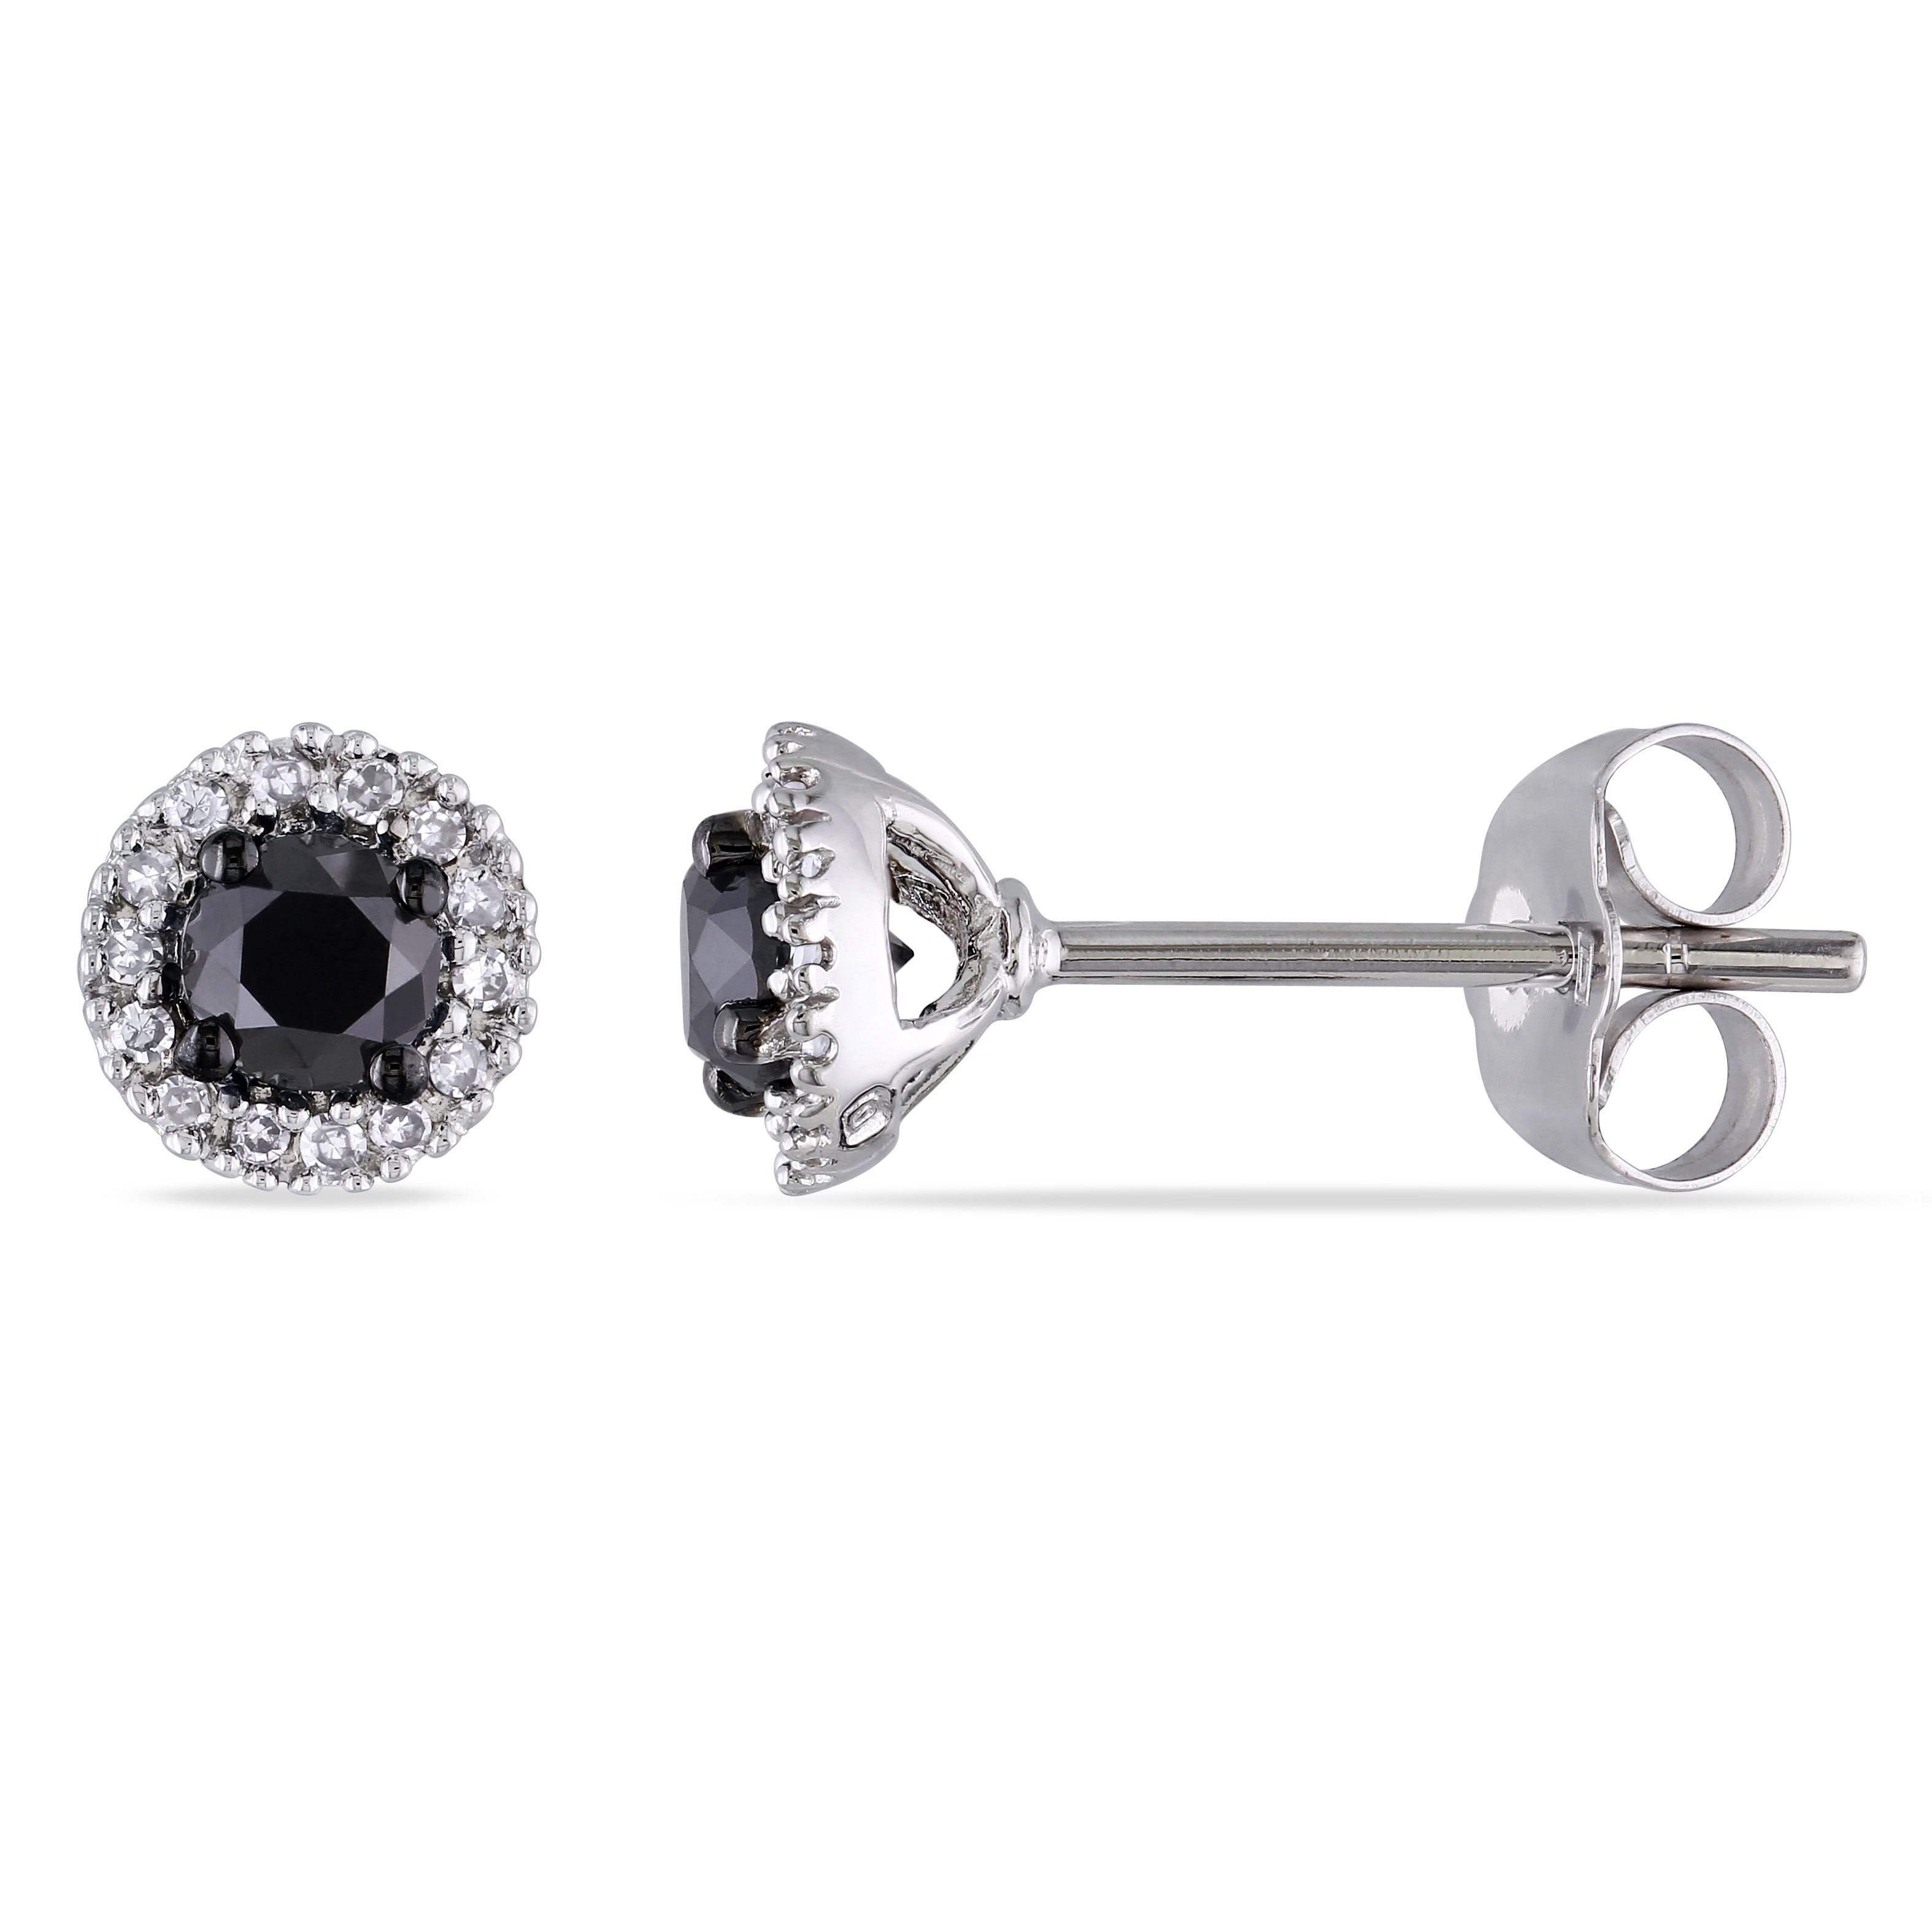 1/2 CT TW Black and White Halo Diamond Stud Earrings in 14k White Gold